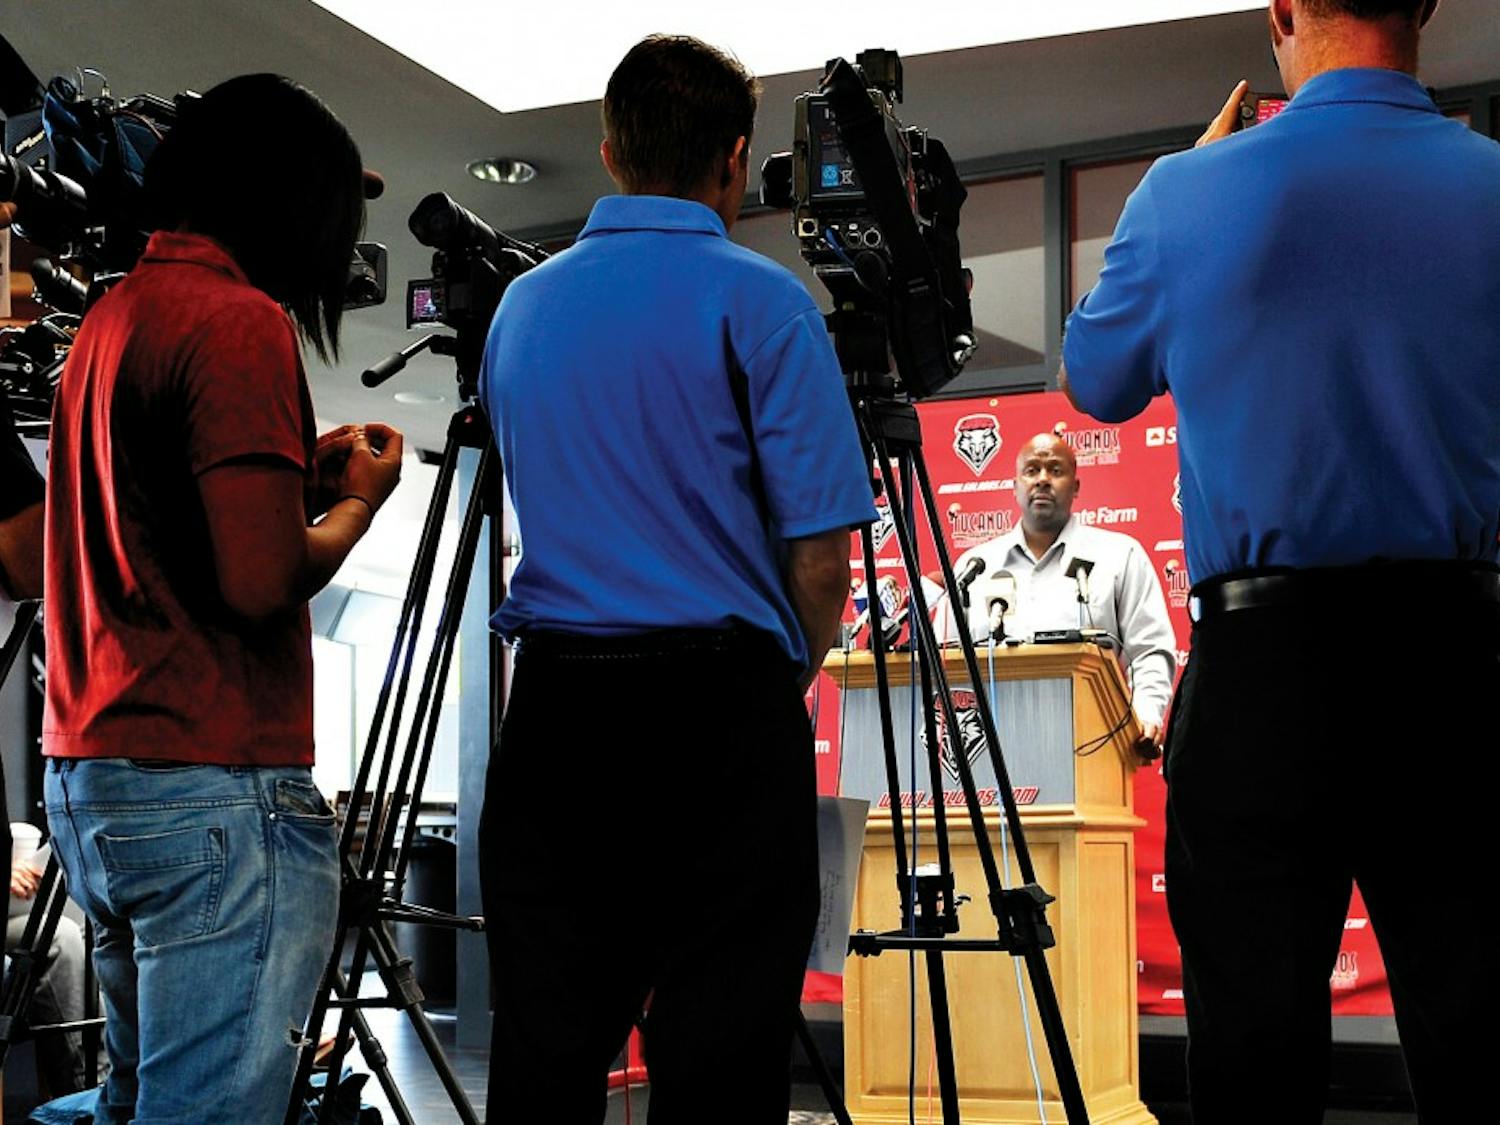 	UNM head football coach Mike Locksley takes questions at the weekly fall news conference regarding the Lobos’ Saturday home opener against Texas Tech. Locksley told the Daily Lobo that he is aware of the investigation involving several Lobo football players.